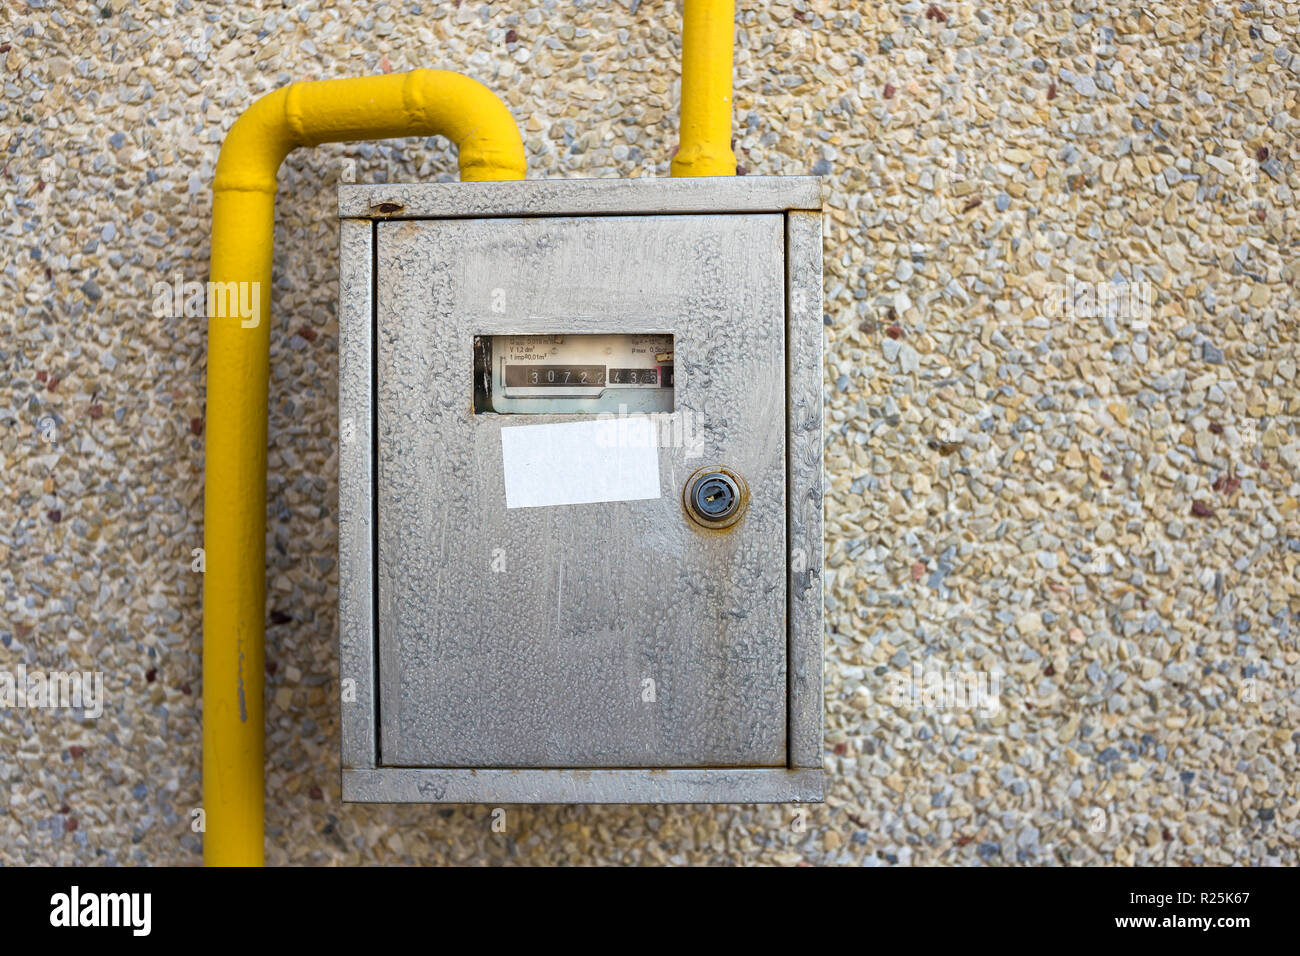 Close-up of metal steel gas meter box with connecting yellow pipes hanging on exterior light stone house wall. Construction, renovation, measurement t Stock Photo